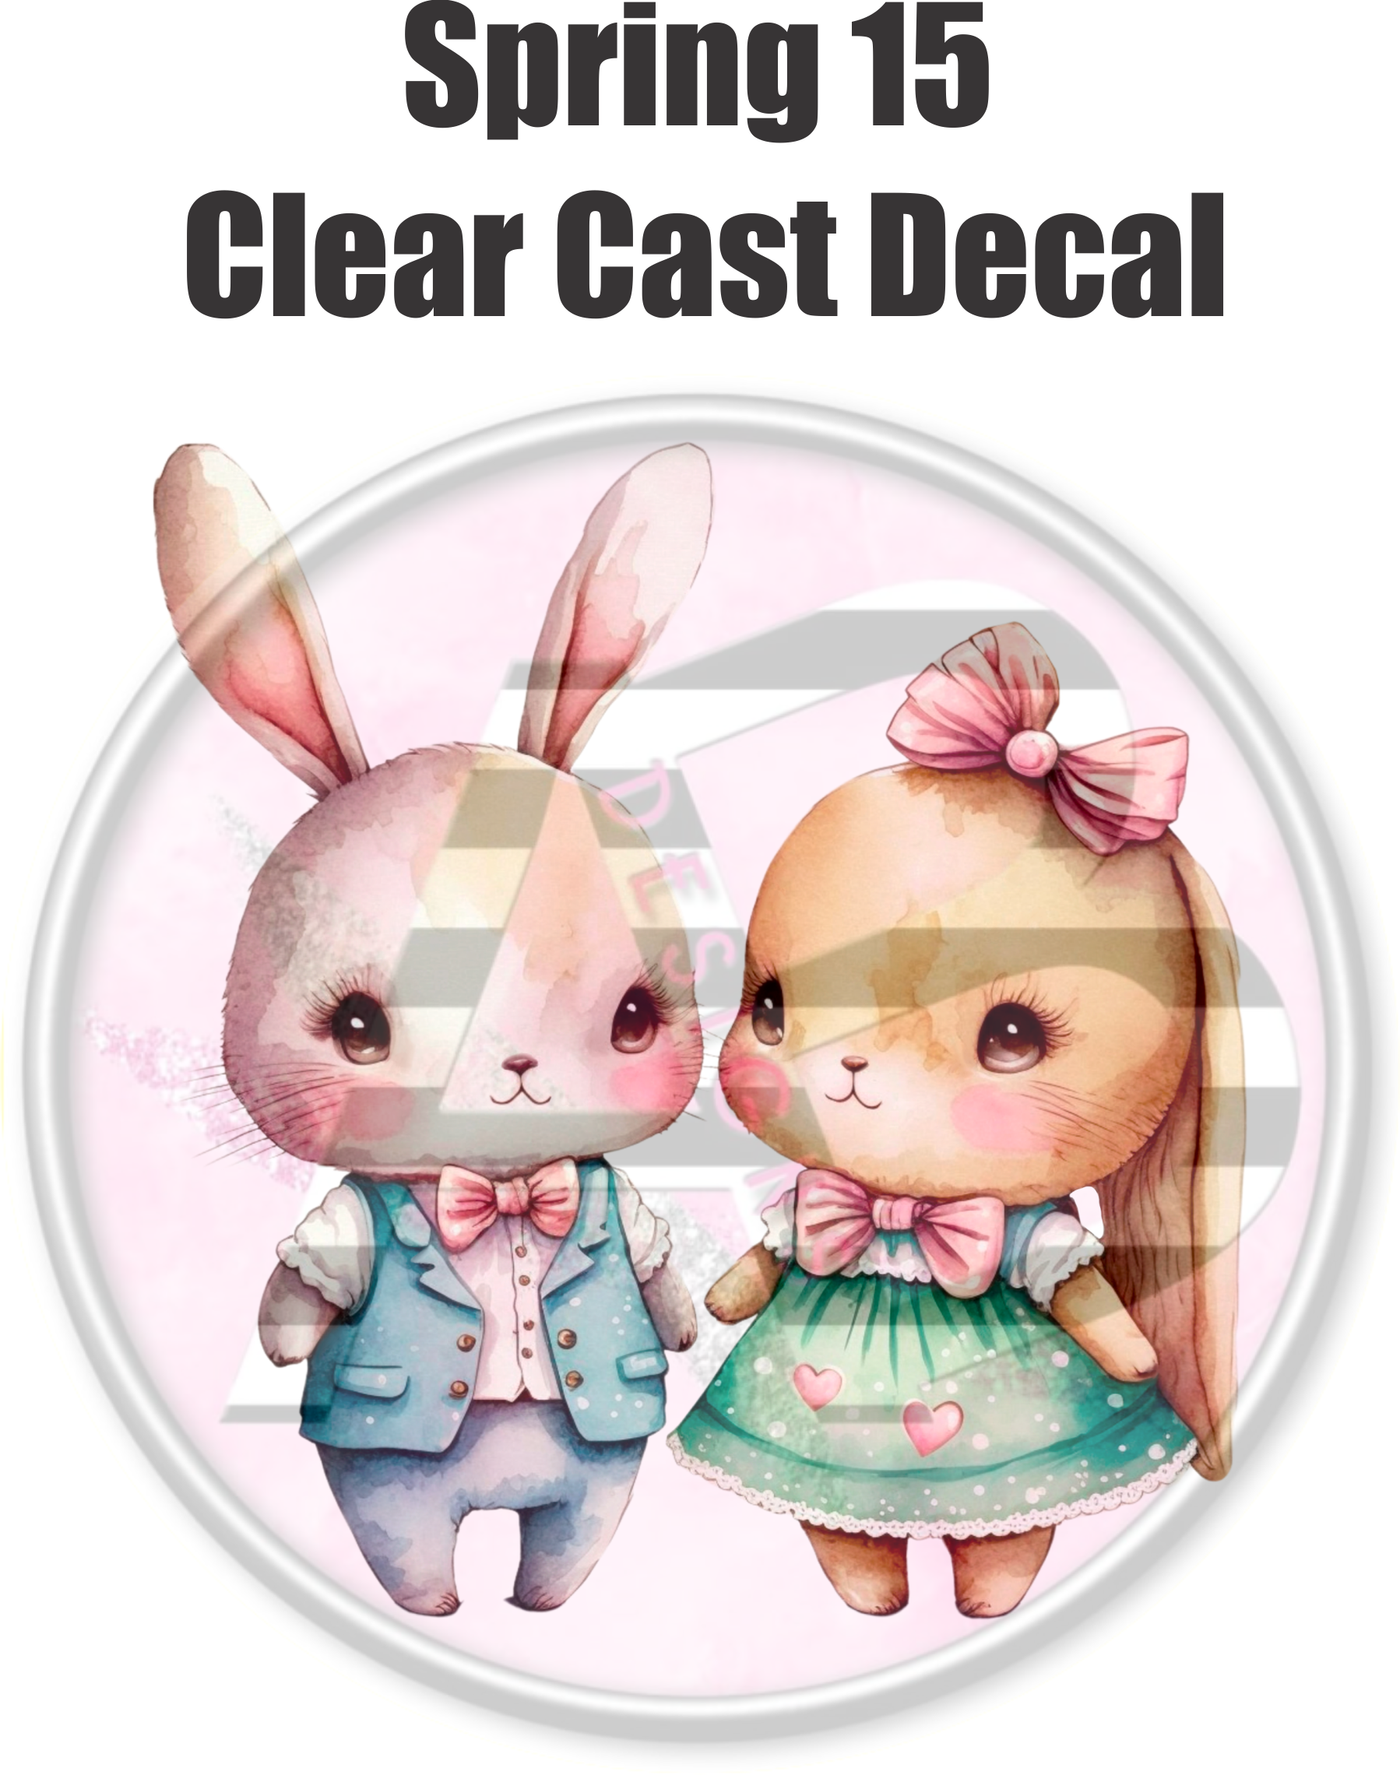 Spring 15 - Clear Cast Decal